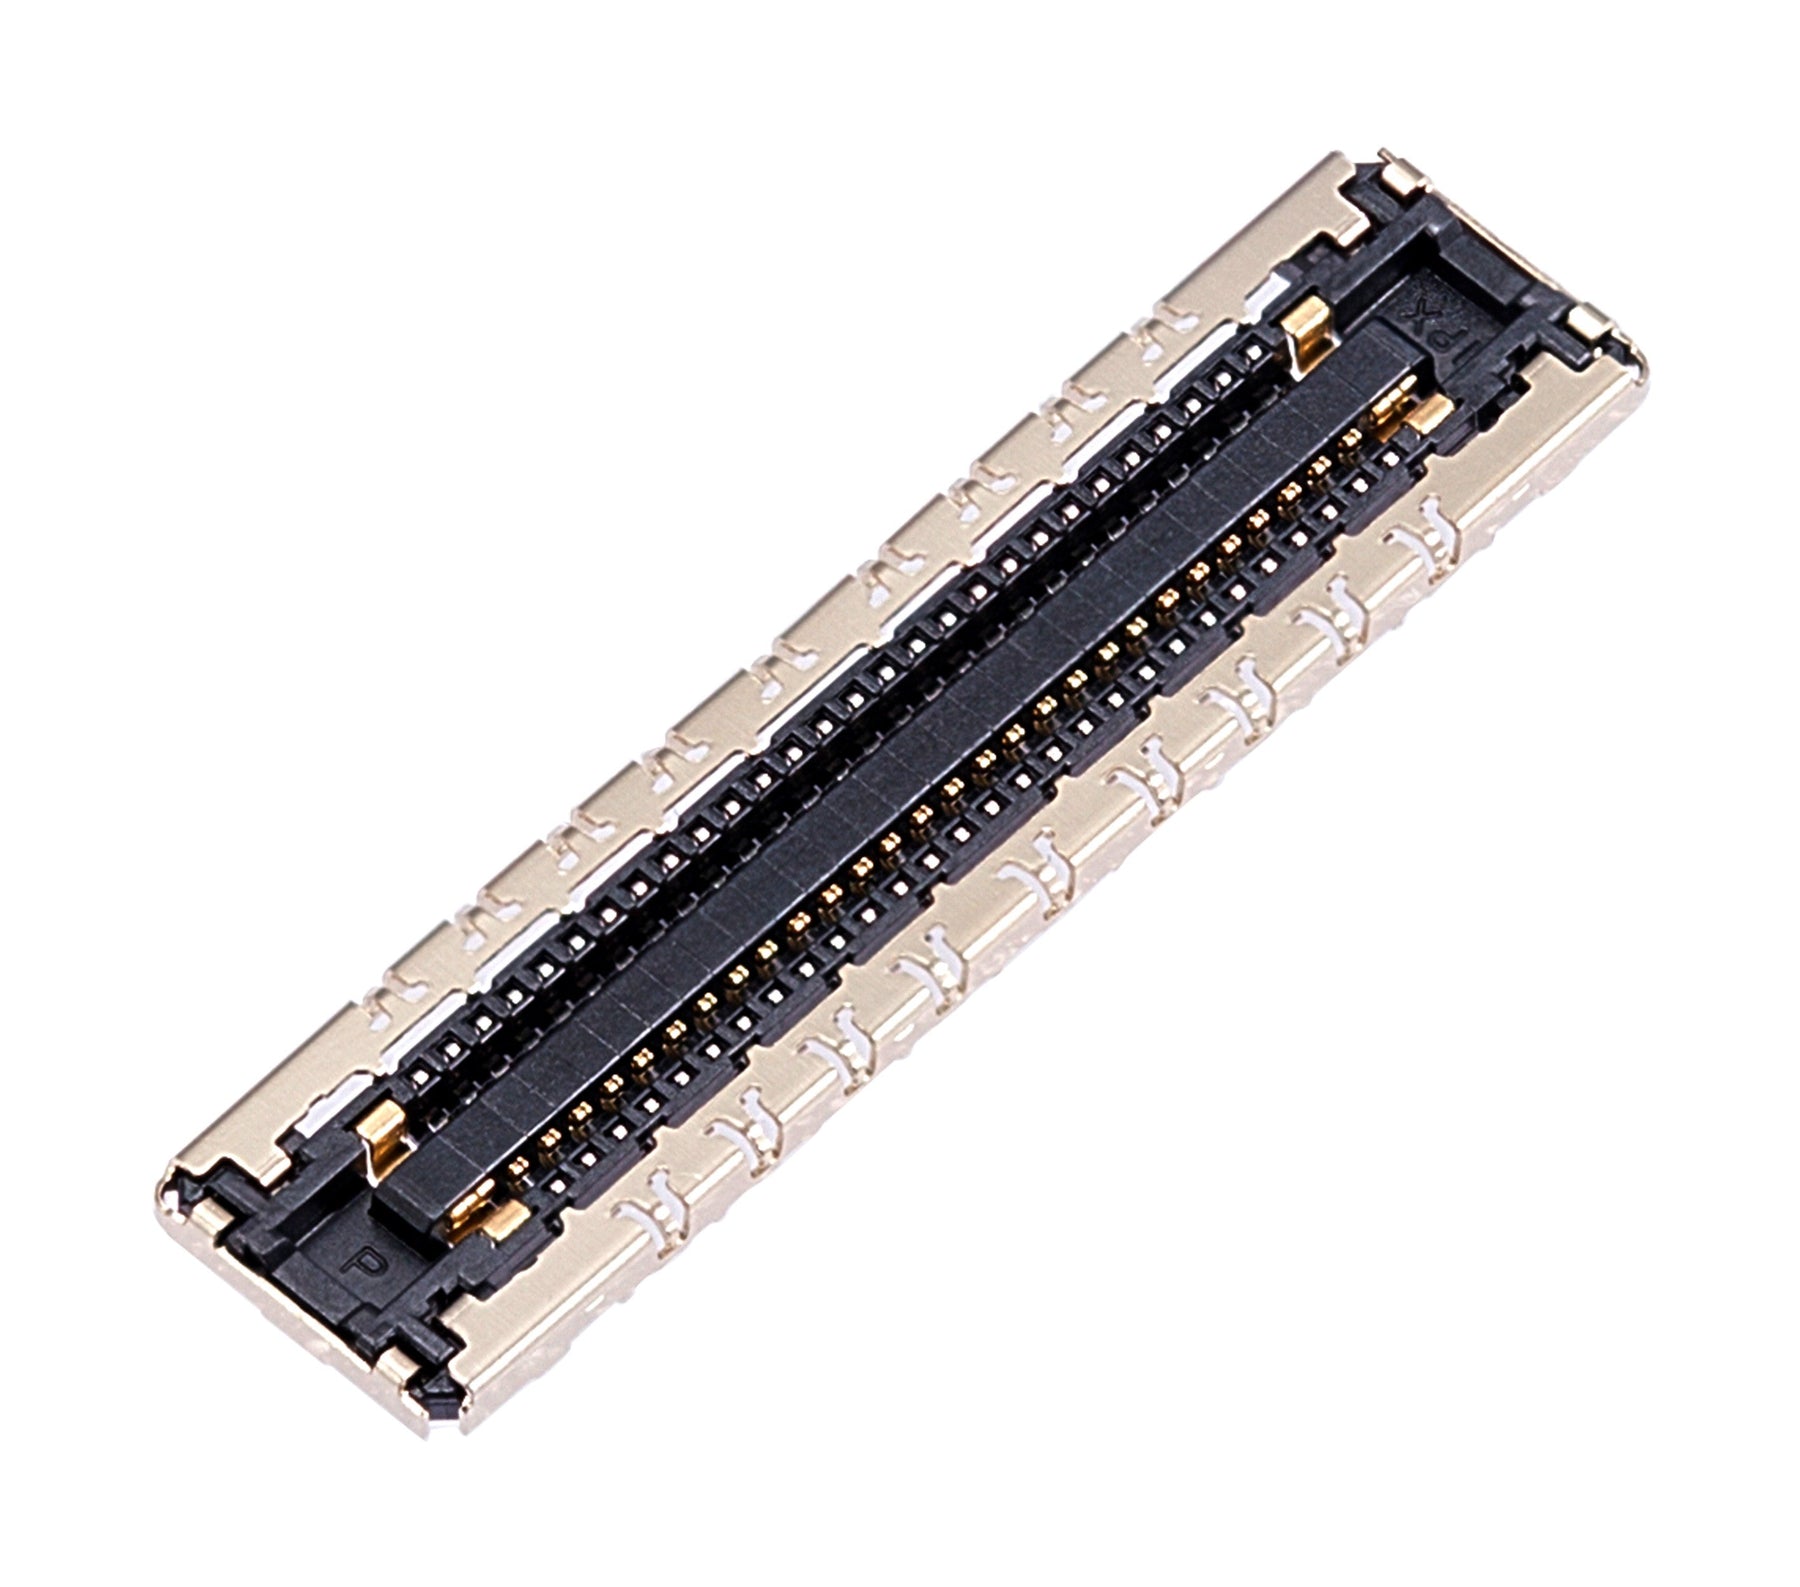 CHARGING PORT FPC CONNECTOR (ON THE MOTHERBOARD) FOR MACBOOK AIR/PRO (2016-2020)